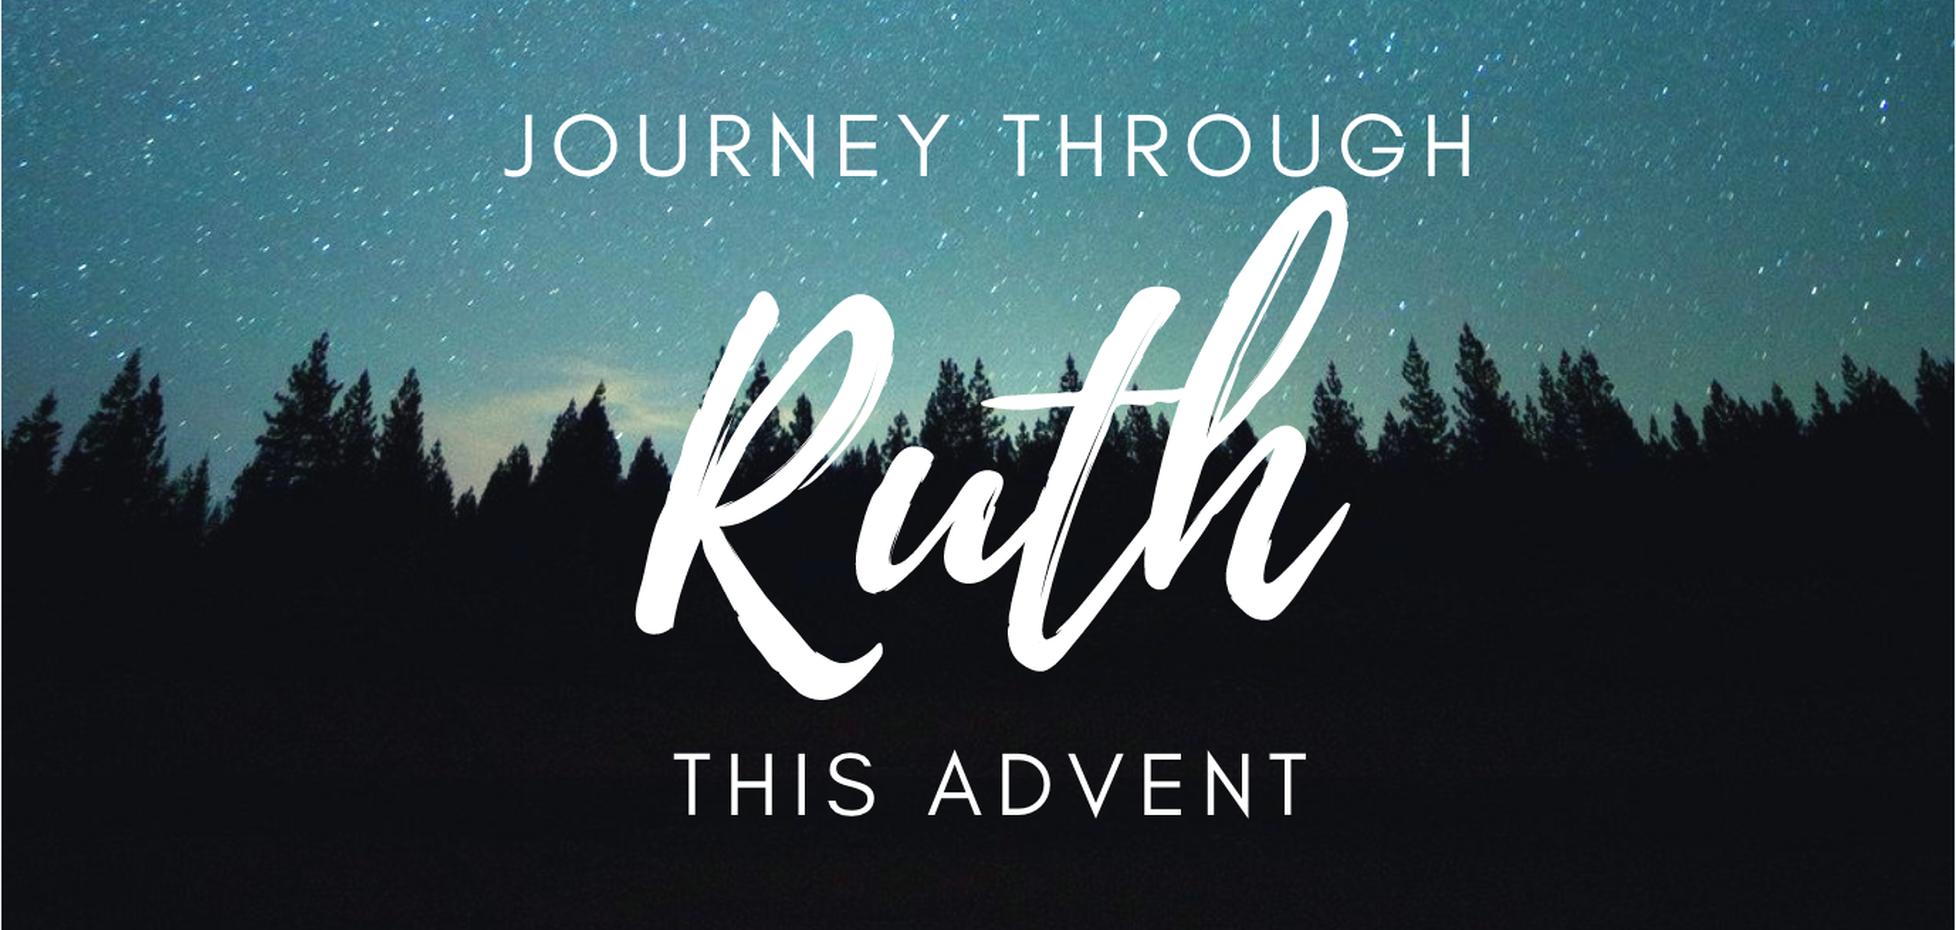 Journey through Ruth this Advent